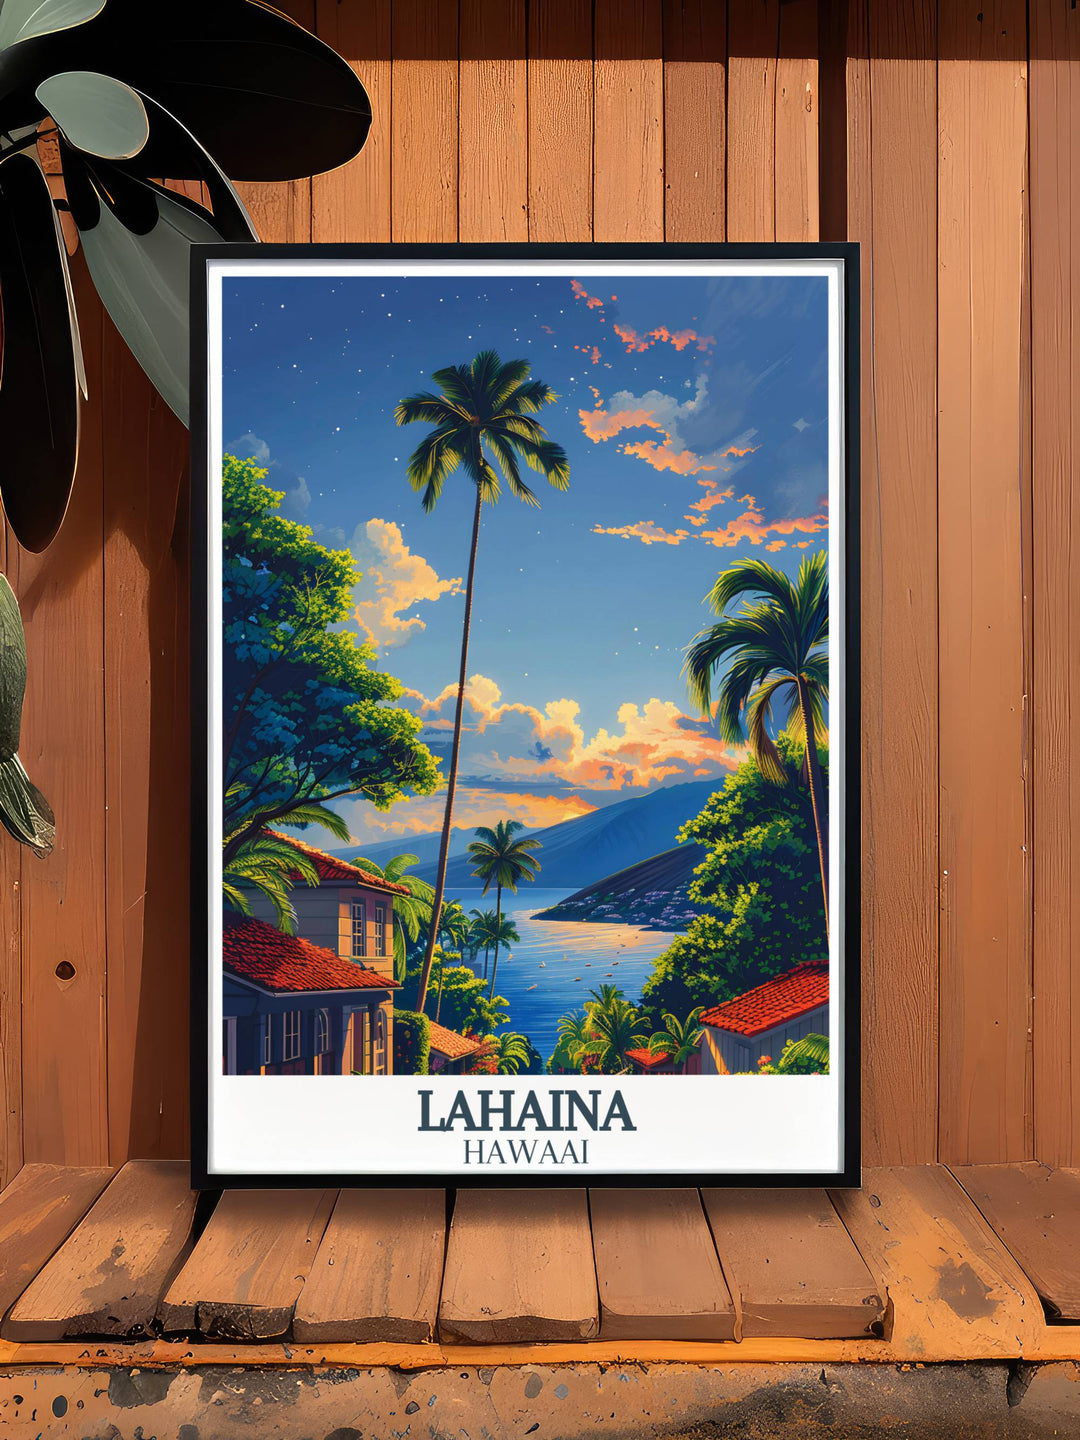 Artistically rendered Hawaii illustration print of Lahaina’s lush landscapes, ideal for adding a serene touch to any home interior with its rich colors and detailed scenery.